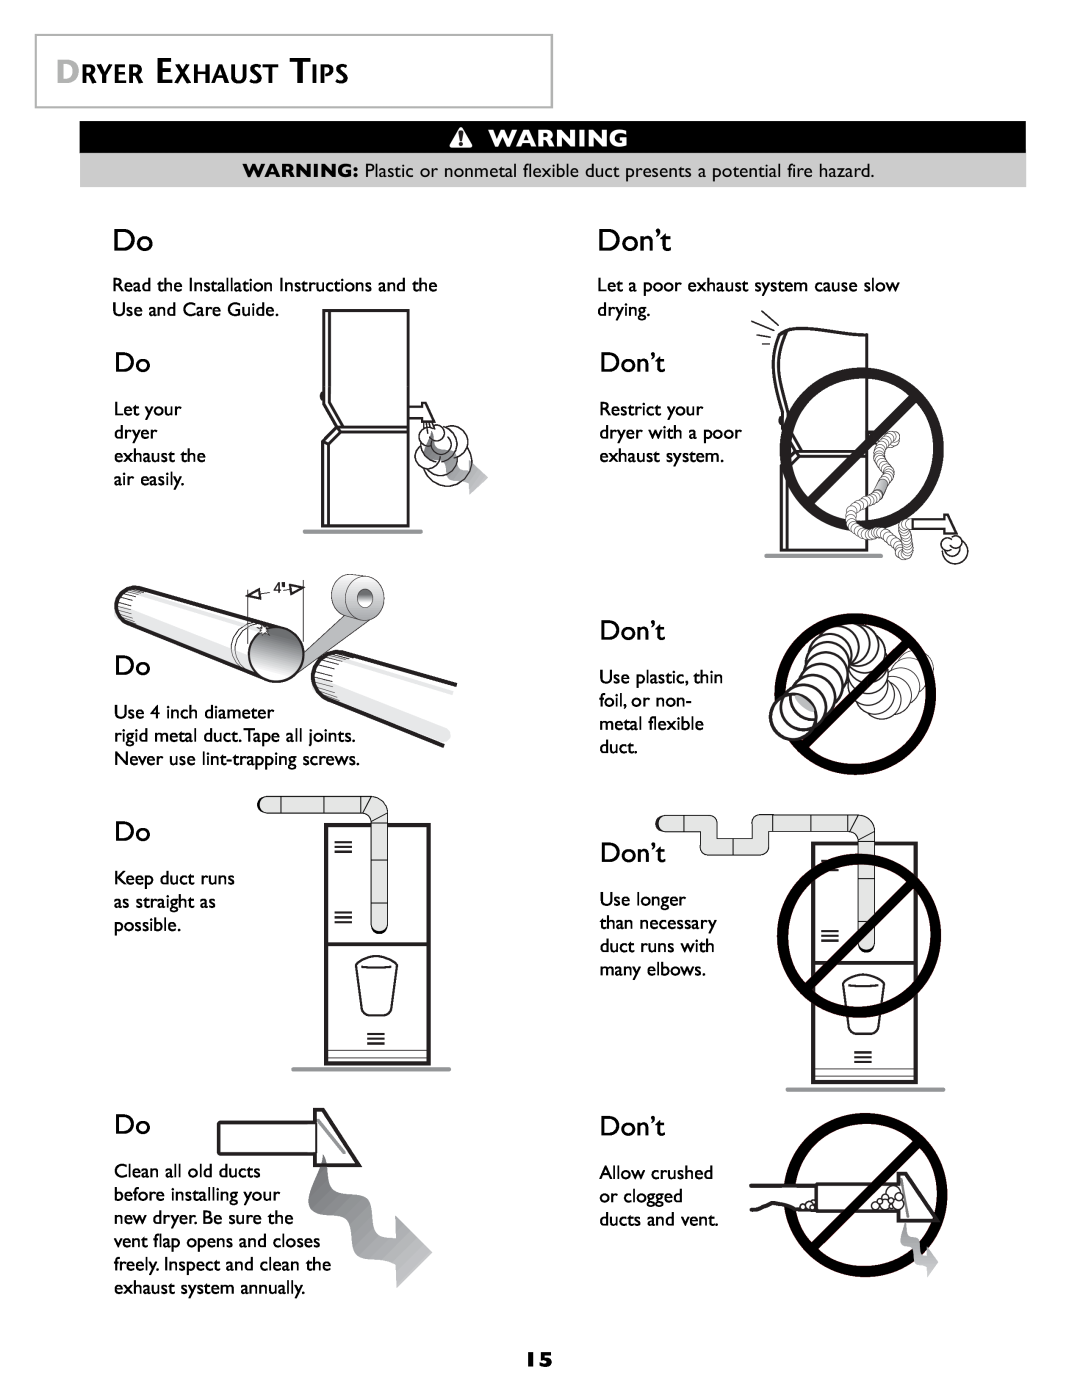 Maytag SL-3 important safety instructions Don’t, Dryer Exhaust Tips 